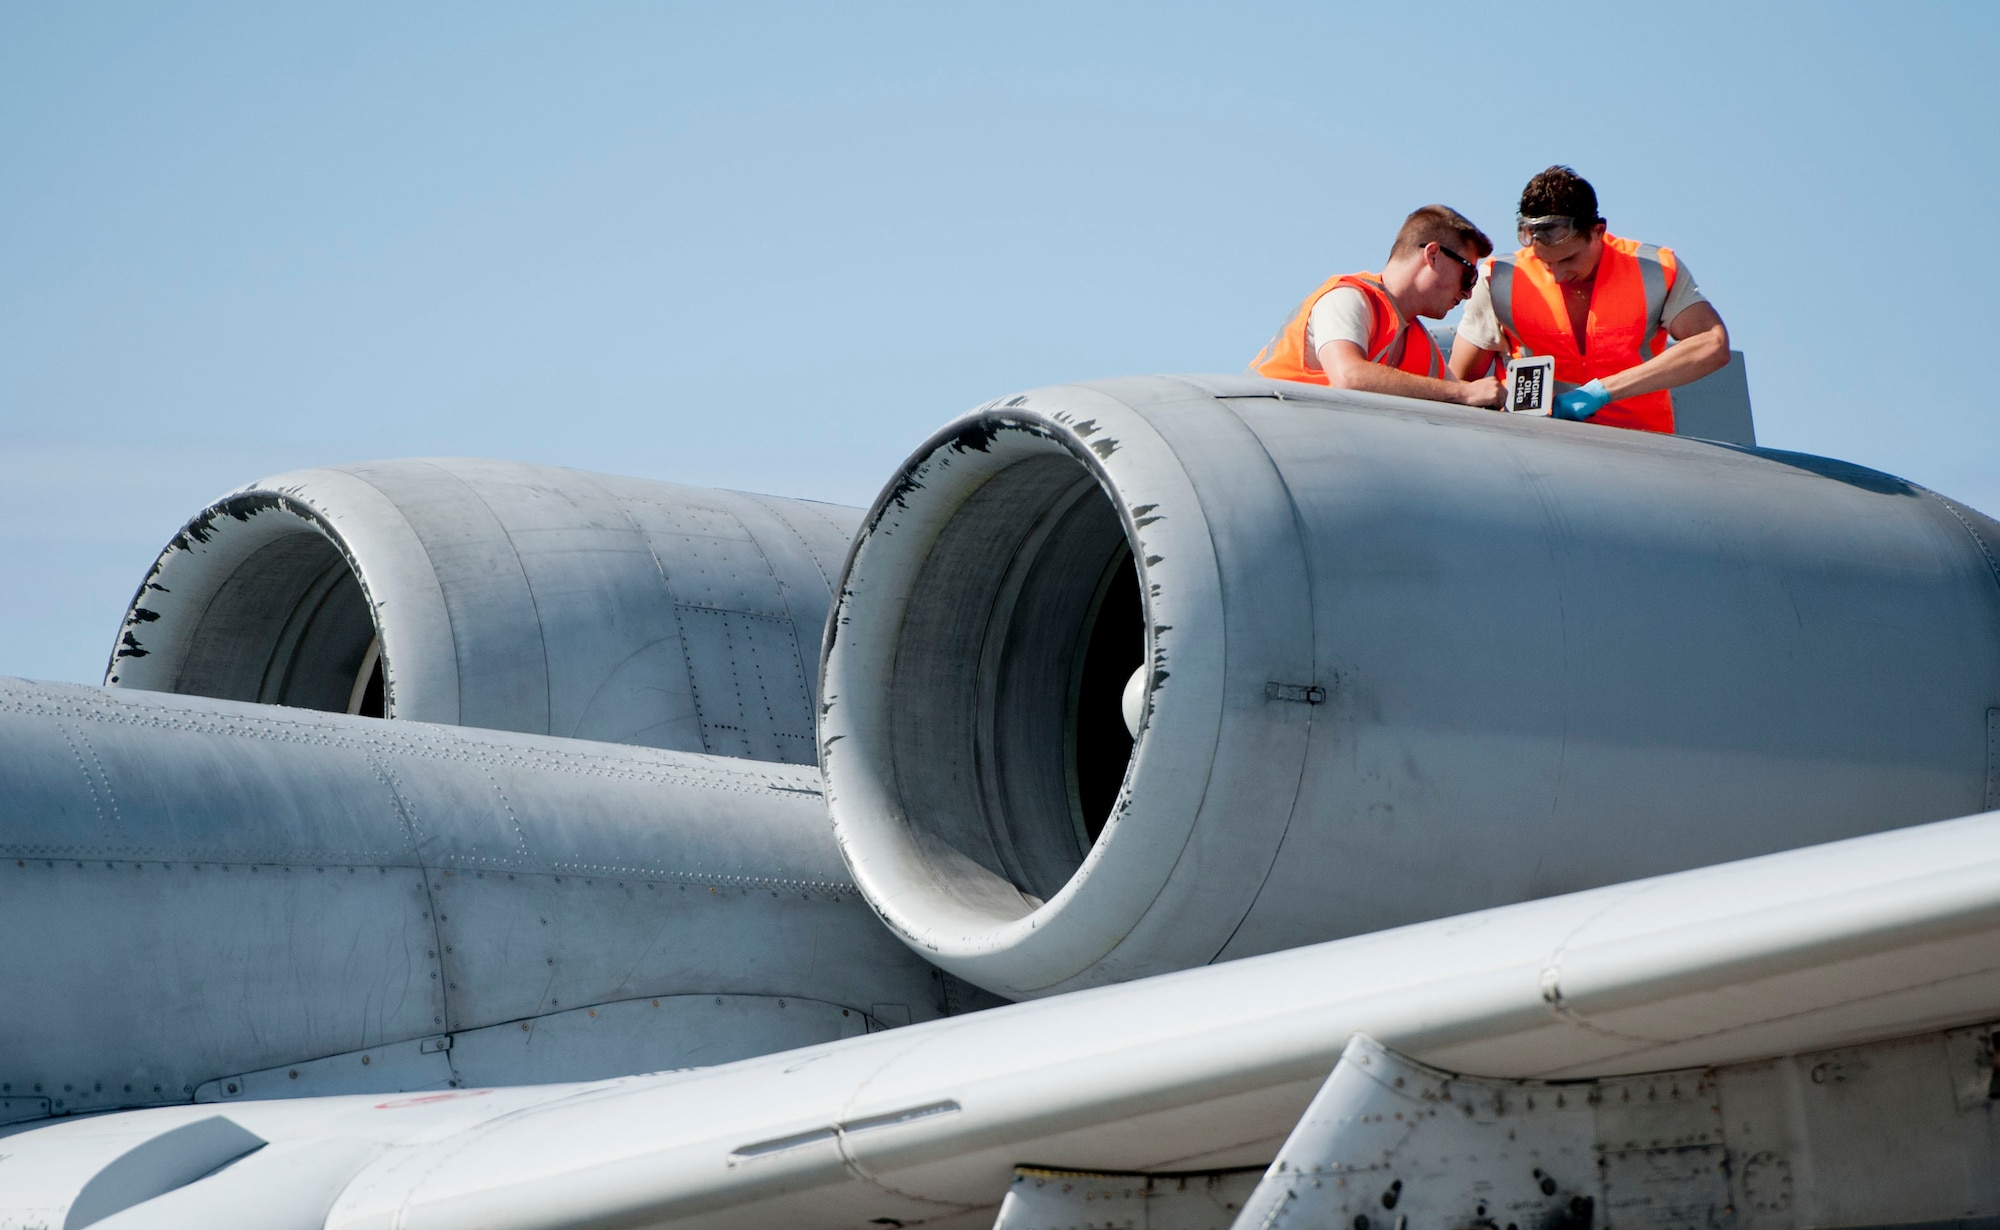 Staff Sgt. Justin Smith and Senior Airman Samuel Clark, both 65th Operations Support Squadron transient alert maintenance technicians, perform maintenance checklists on an A-10 Thunderbolt II on Lajes Field, Azores, Portugal, August 1, 2015. The 354th Expeditionary Fighter Squadron returns home after deploying 12 A-10s as part of a Theater Security Package in support of Operation Atlantic Resolve, to Spangdahlem AB, Germany where they conducted training alongside our NATO allies to strengthen interoperability and to demonstrate U.S. commitment to the security and stability of Europe. (U.S. Air Force photo by Master Sgt. Bradley C. Church).